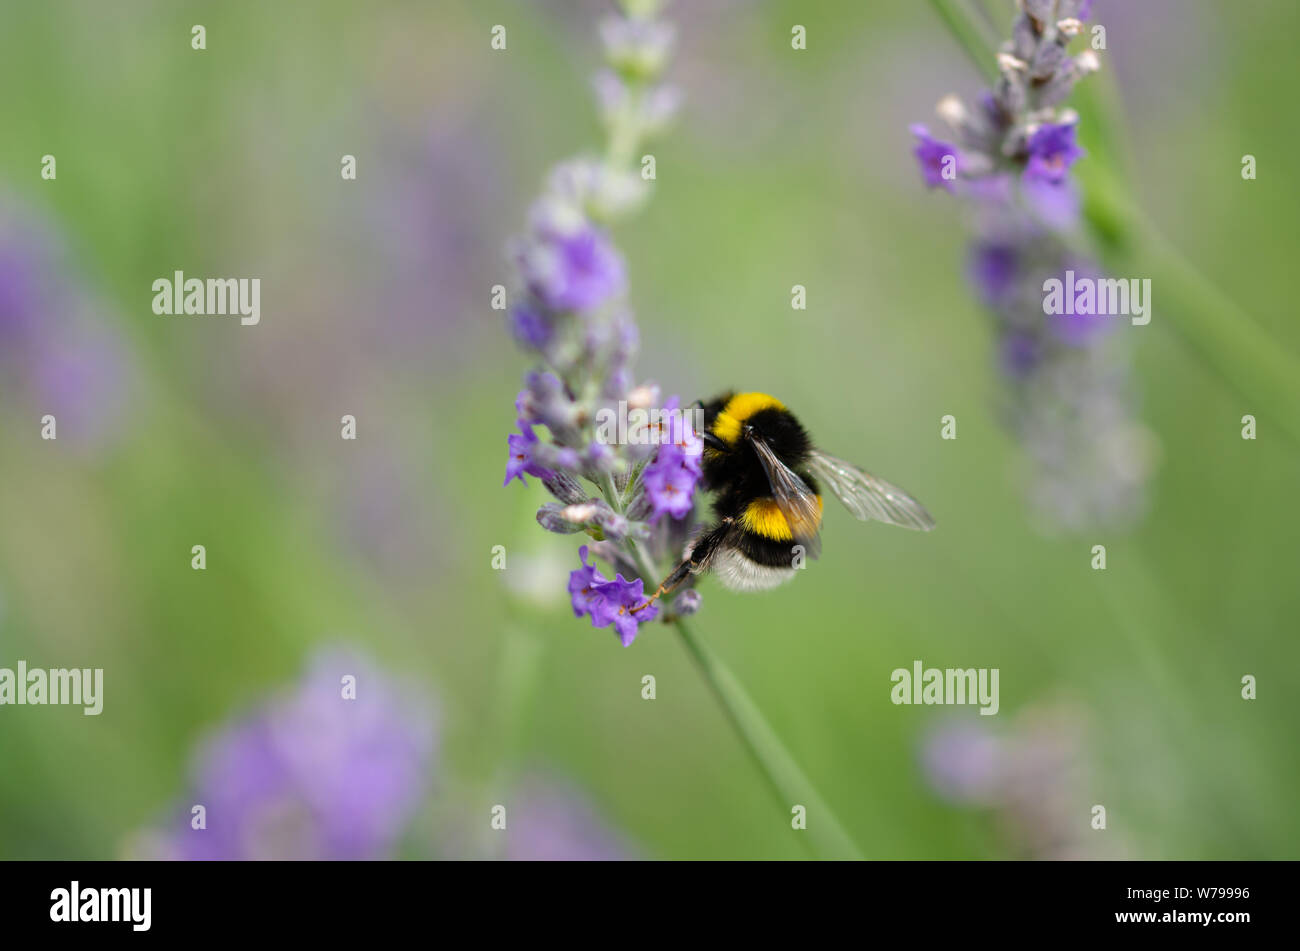 Bumblebee is collecting pollen from lavender flower. Stock Photo